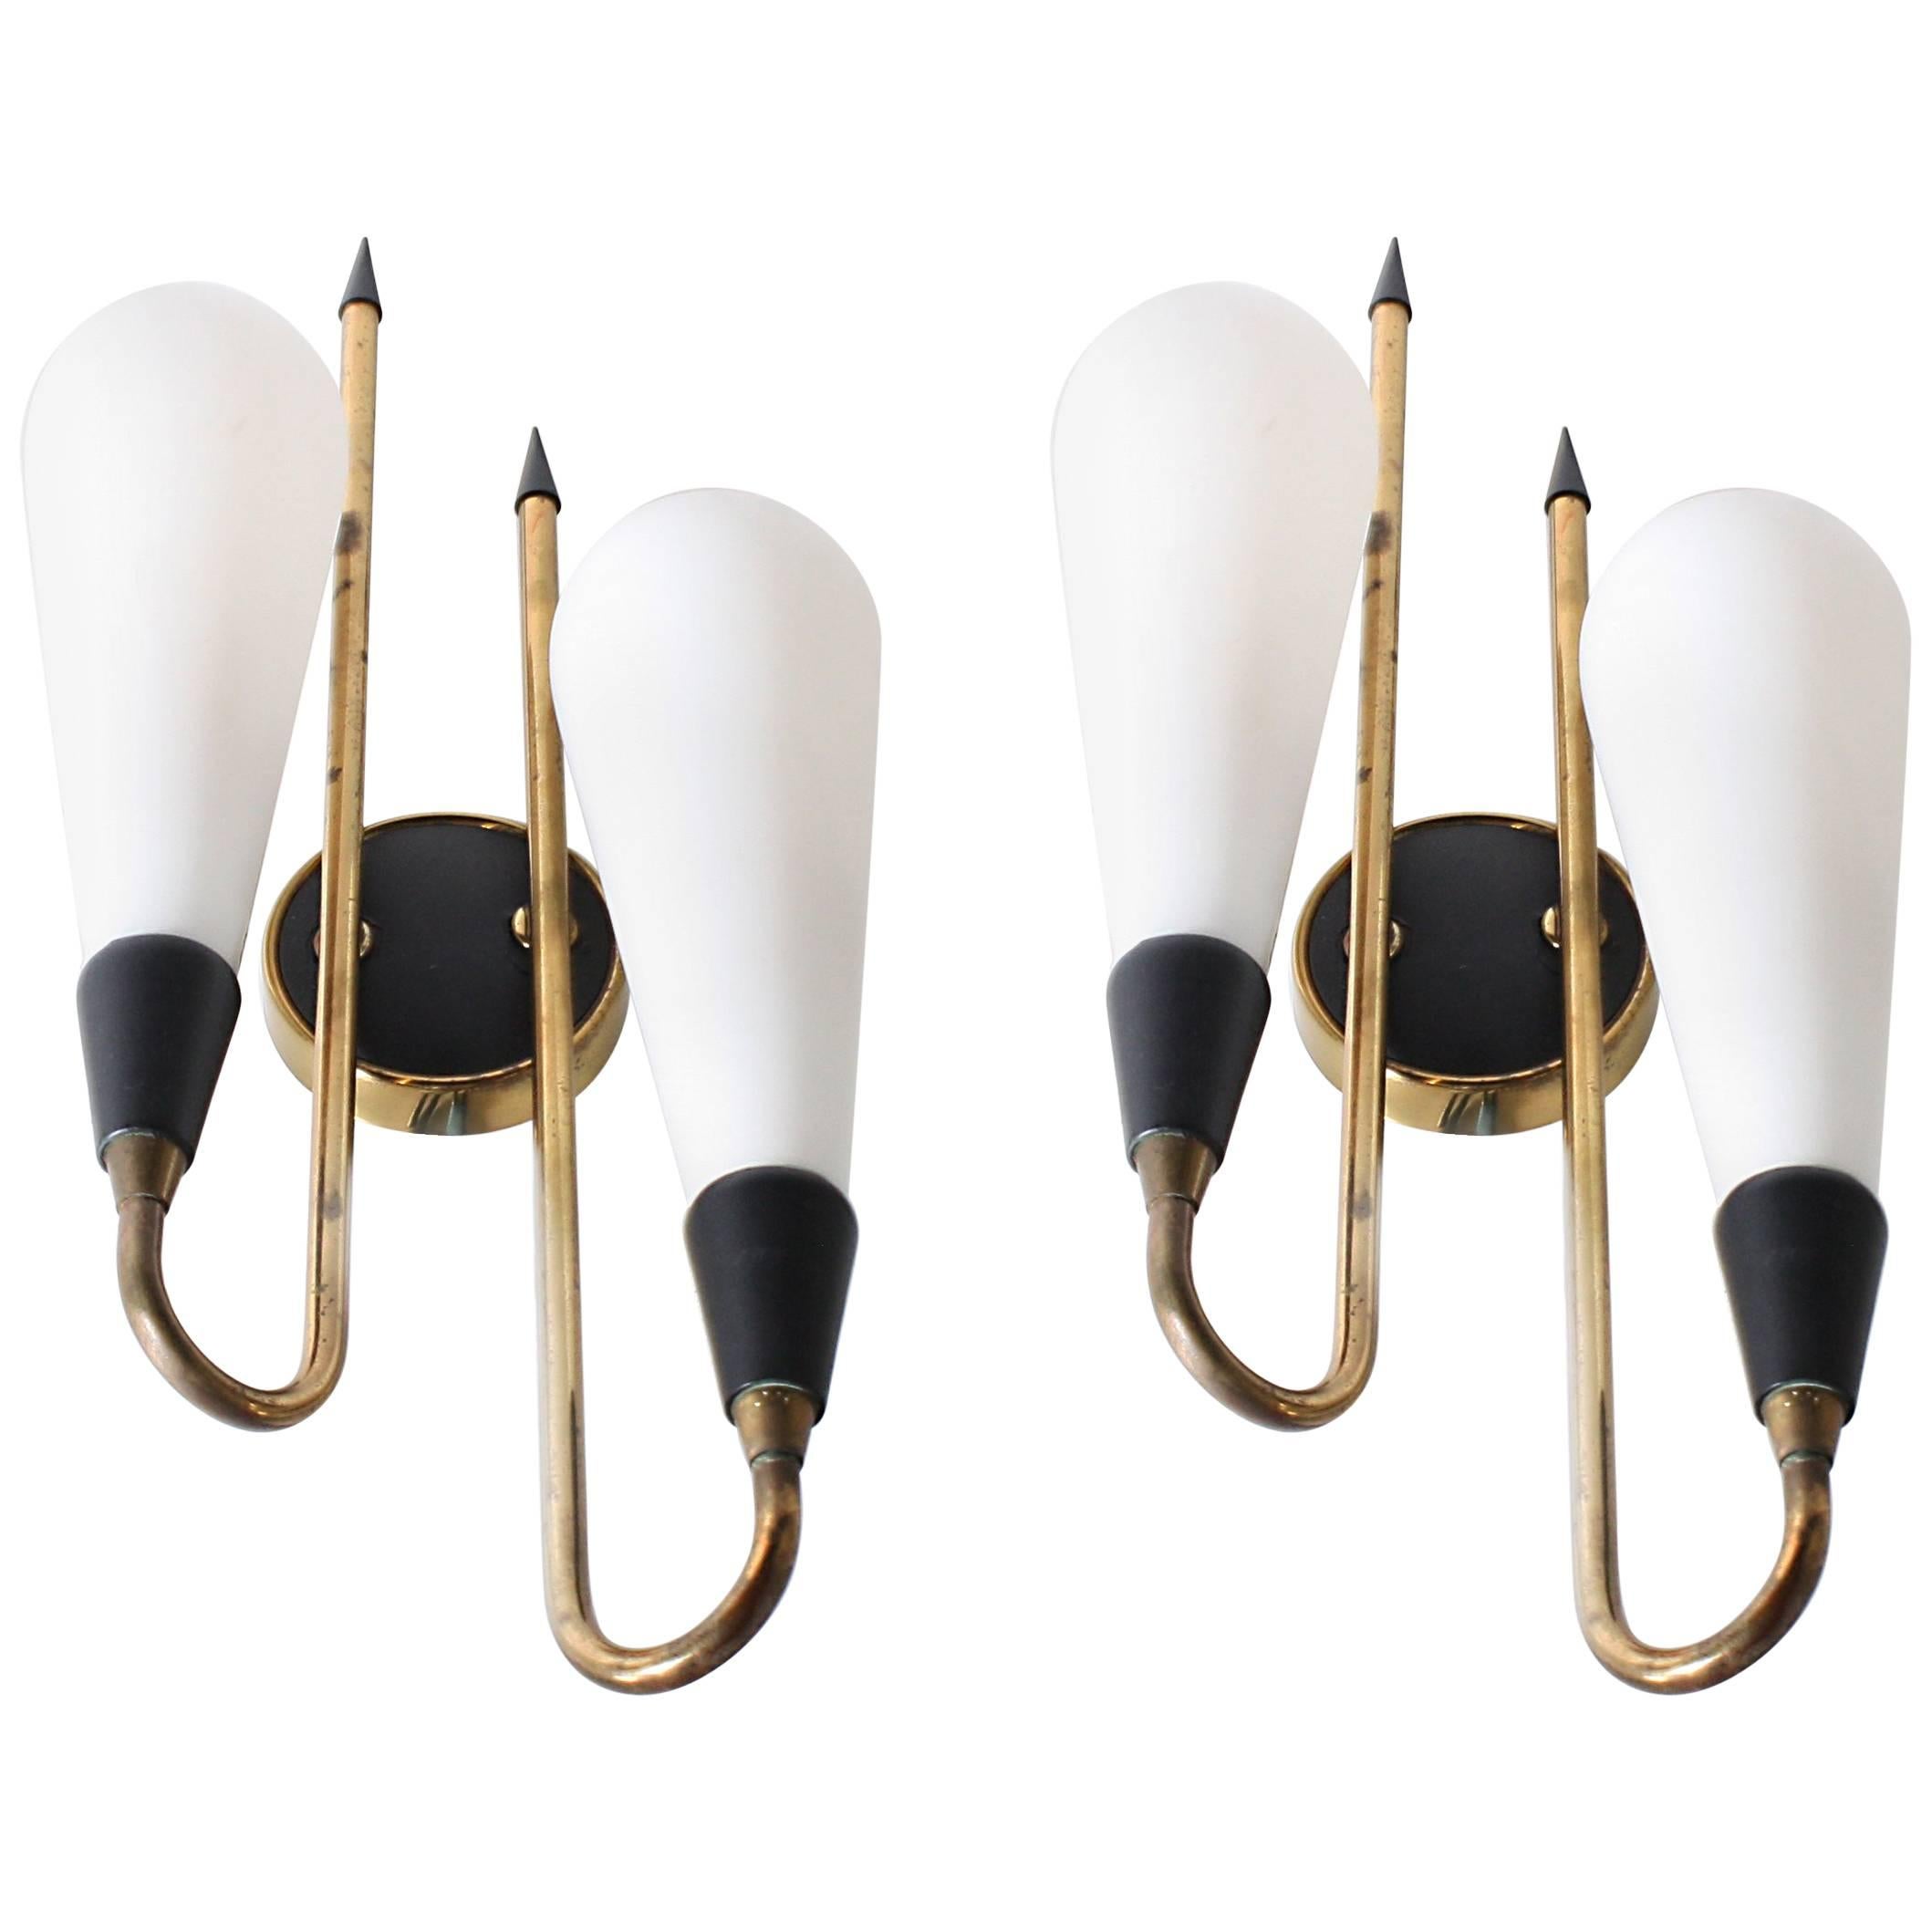 Pair of Italian Brass and Glass Wall Sconces, circa 1950